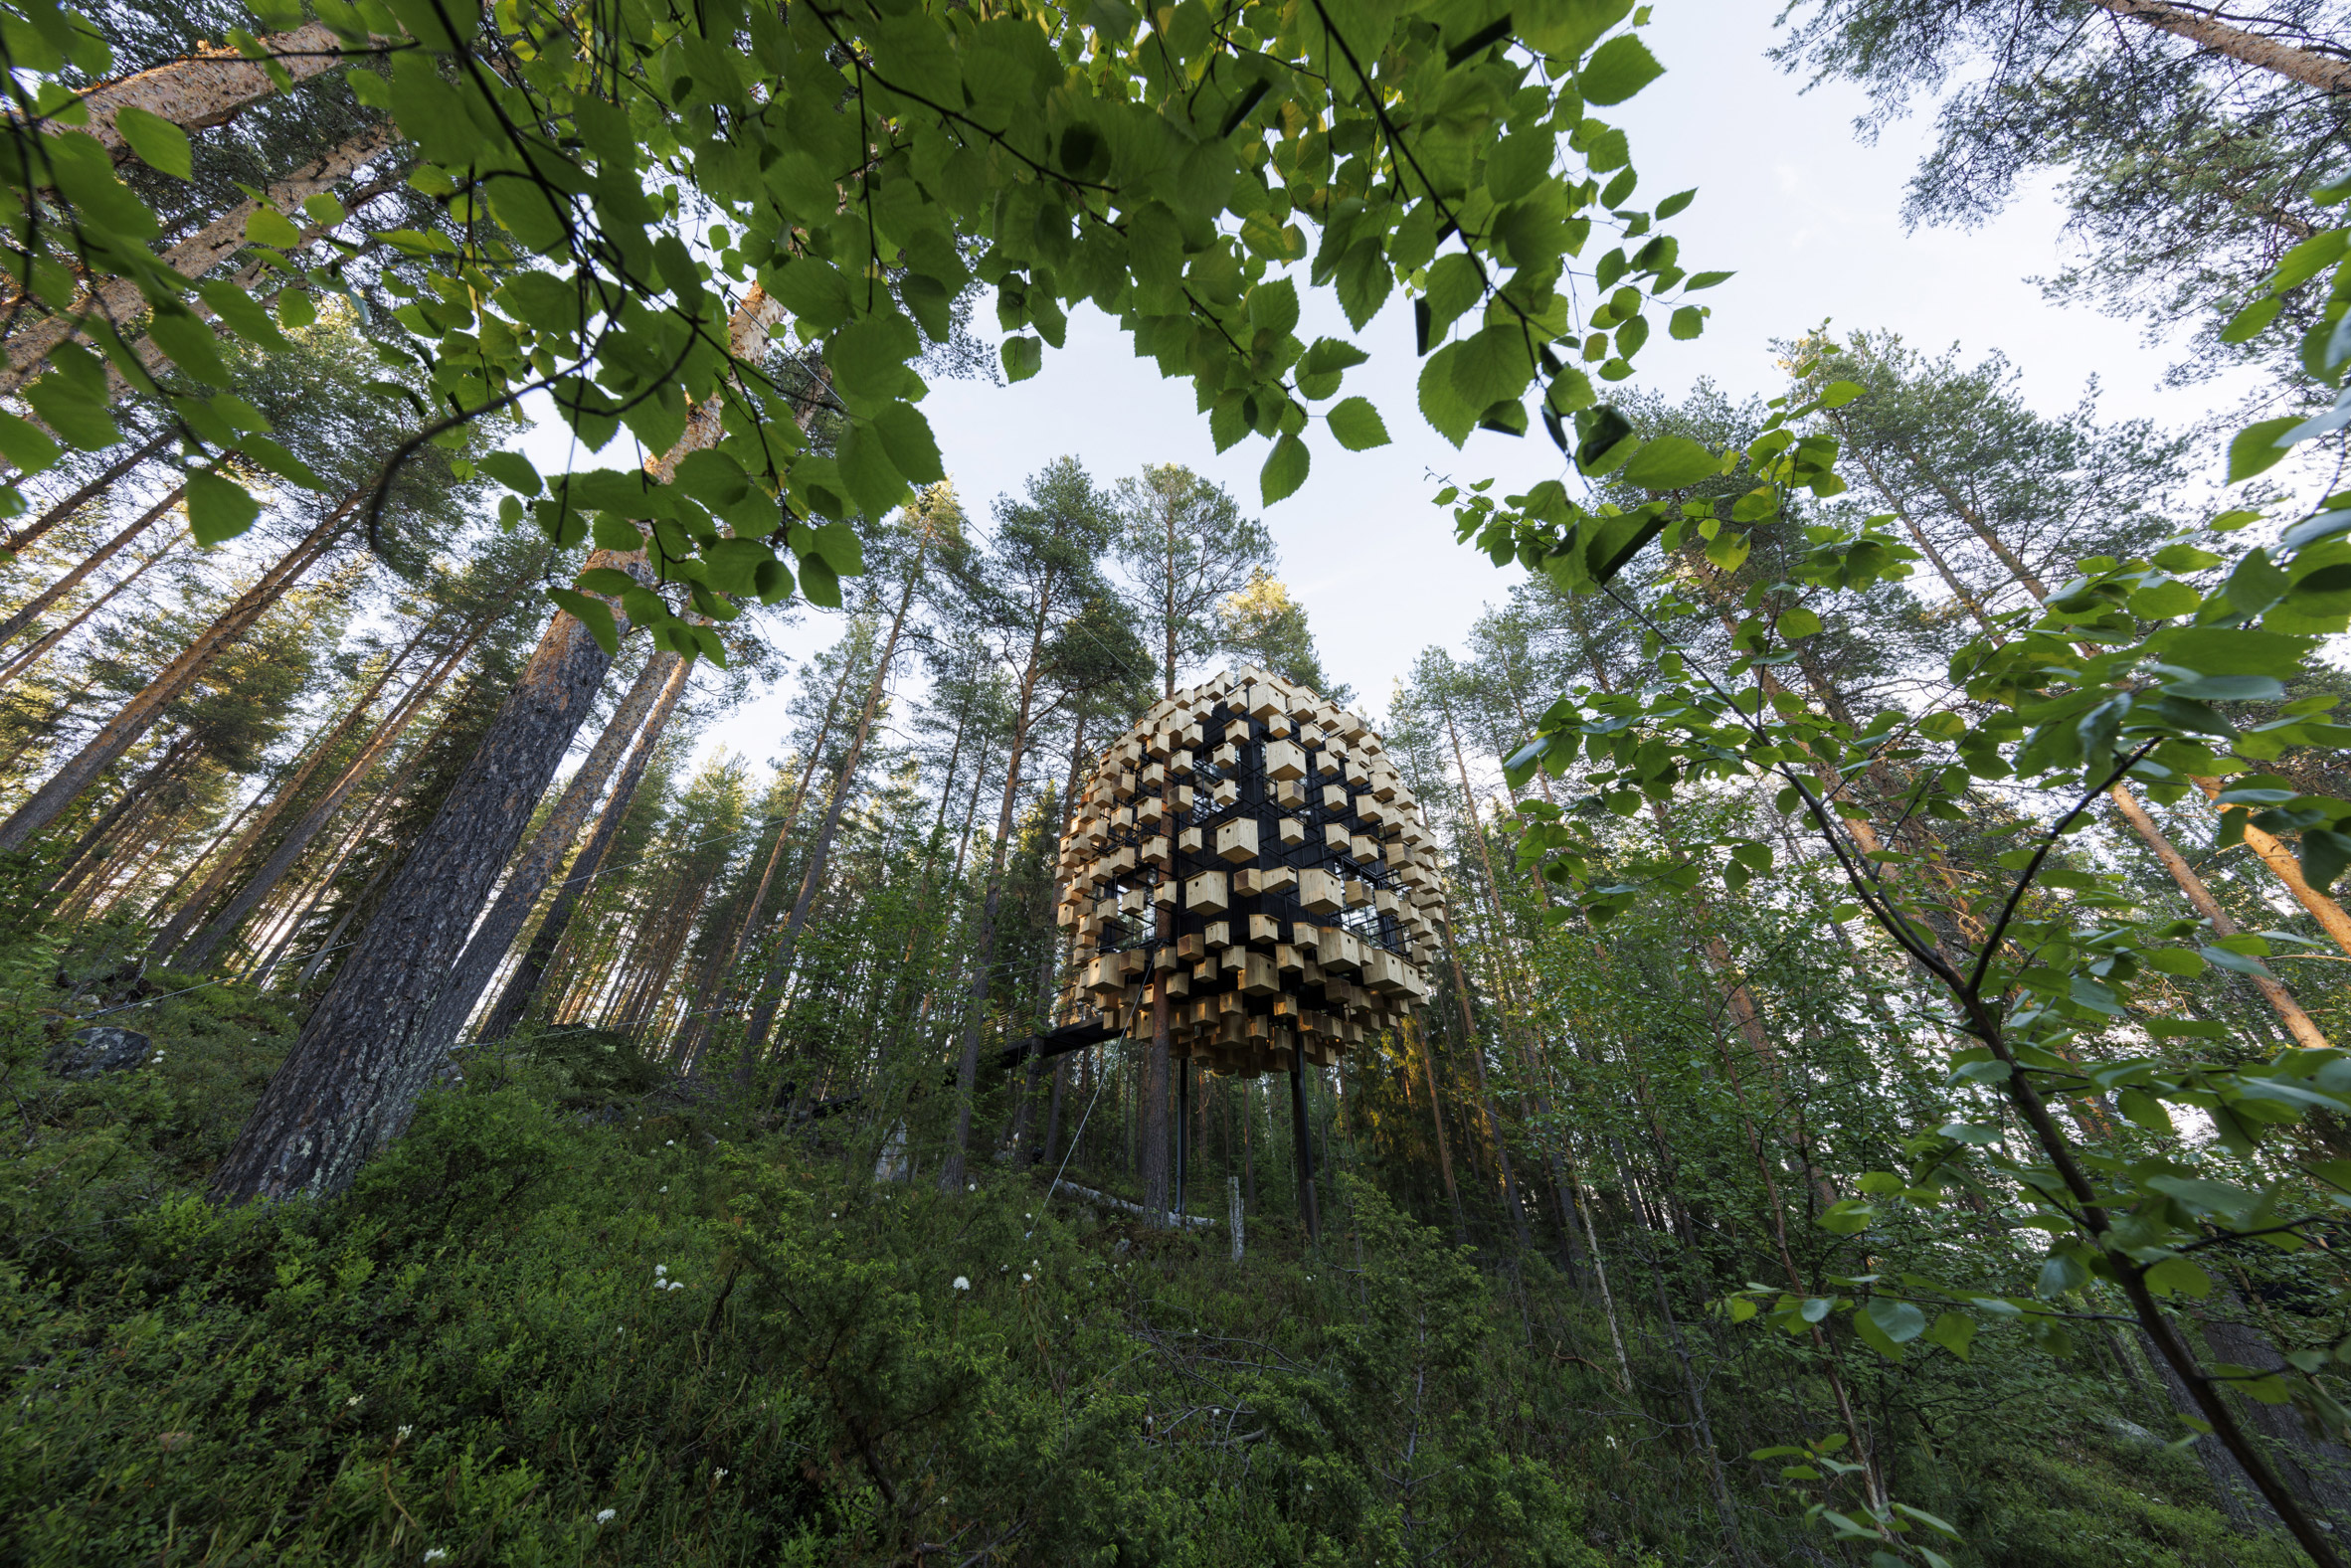 Biosphere treehouse at the Treehotel